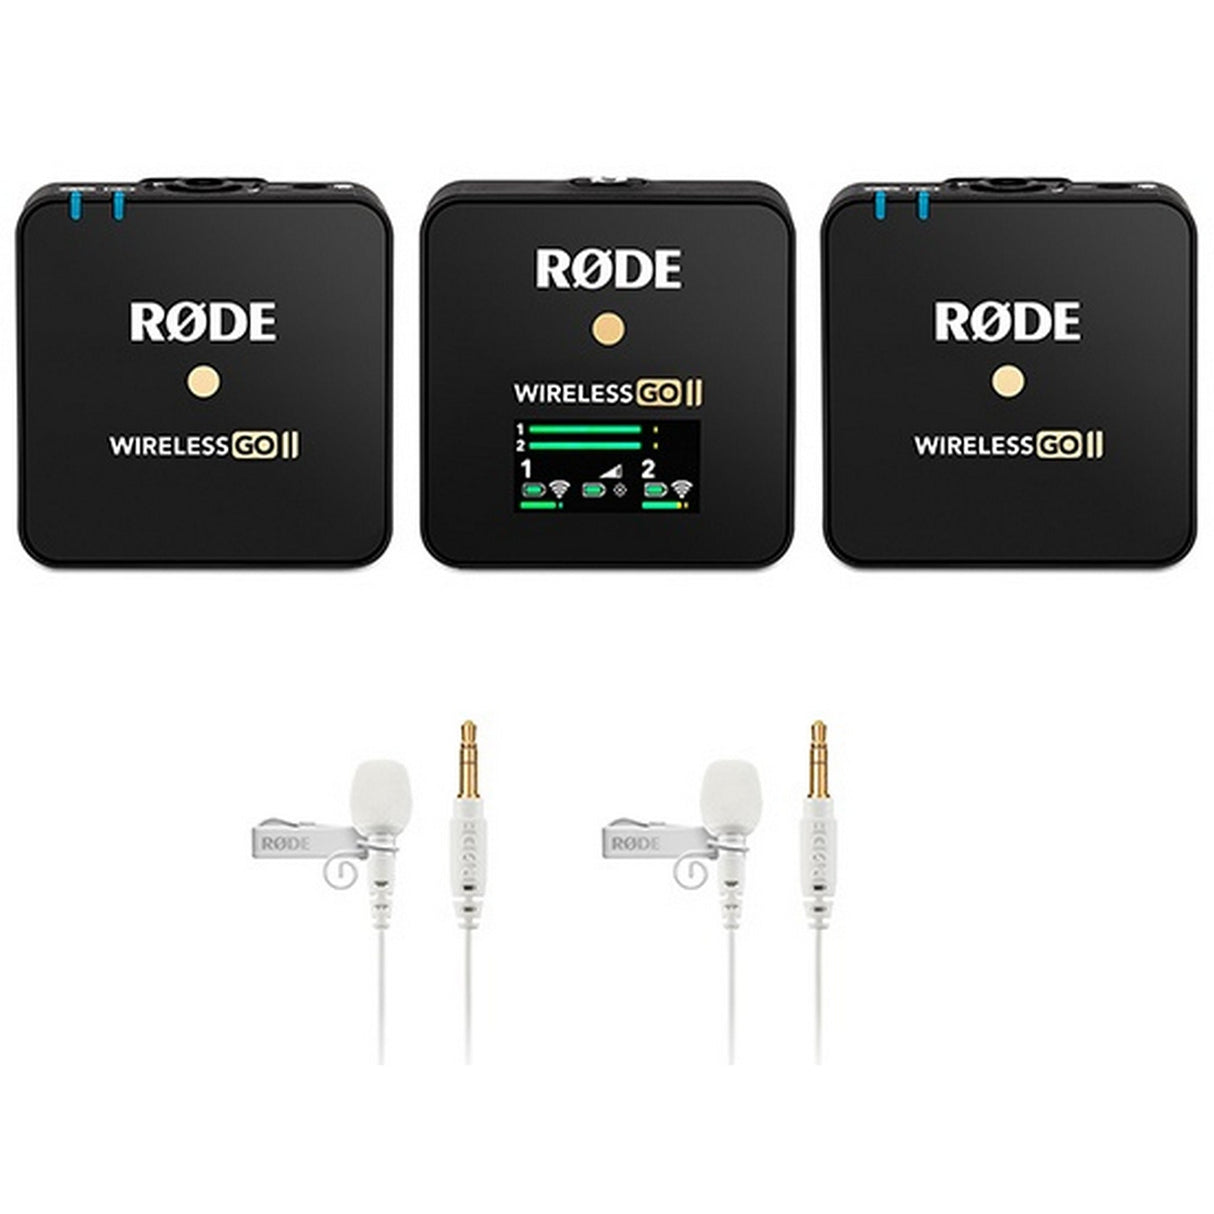 RODE GO II Dual Channel Wireless Microphone System with 3.5mm TRS Lavalier, White